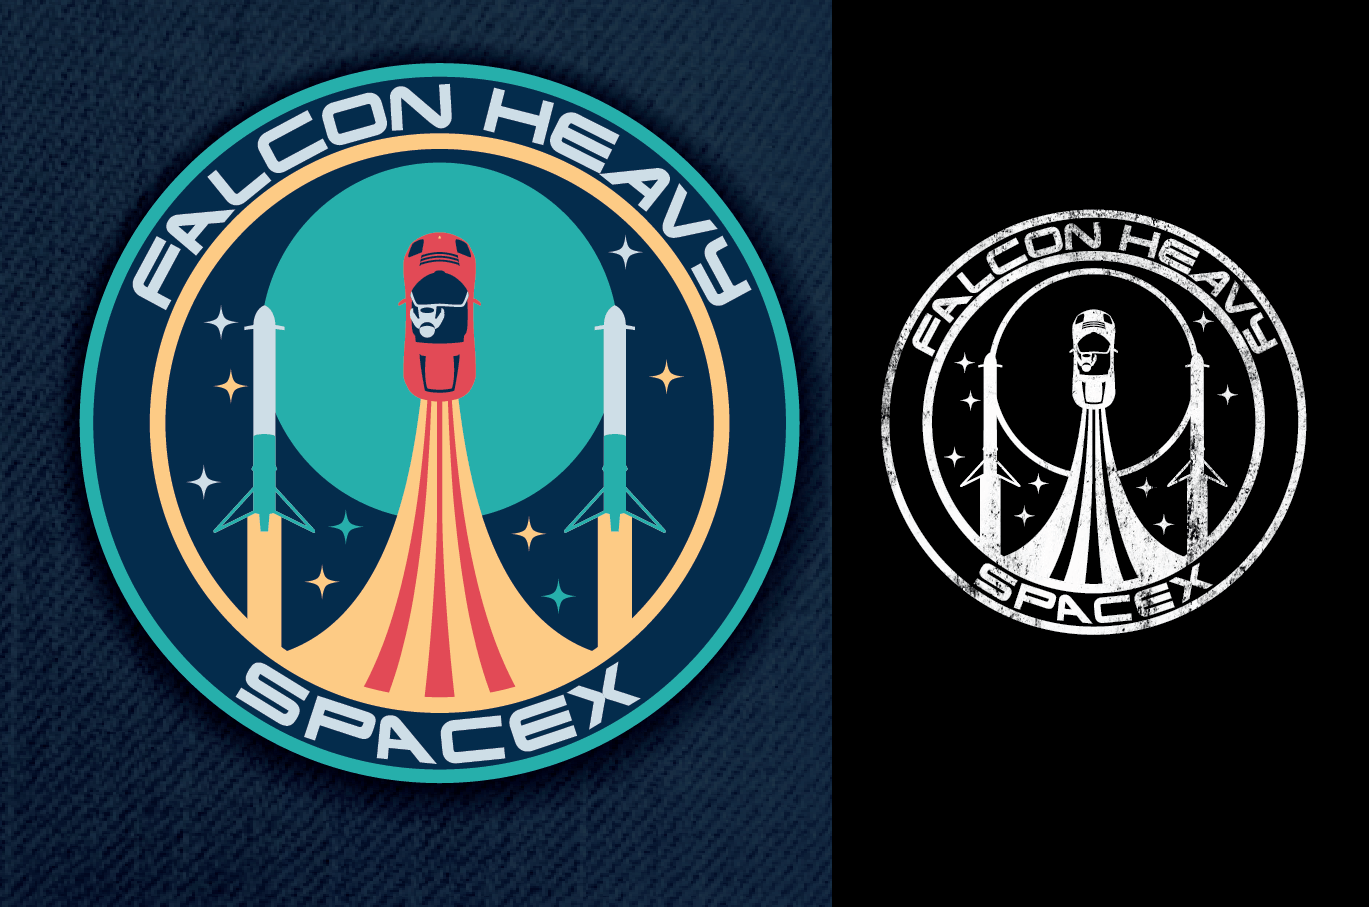 Falcon Heavy SpaceX Logo - SpaceX Falcon patch and tshirt concept